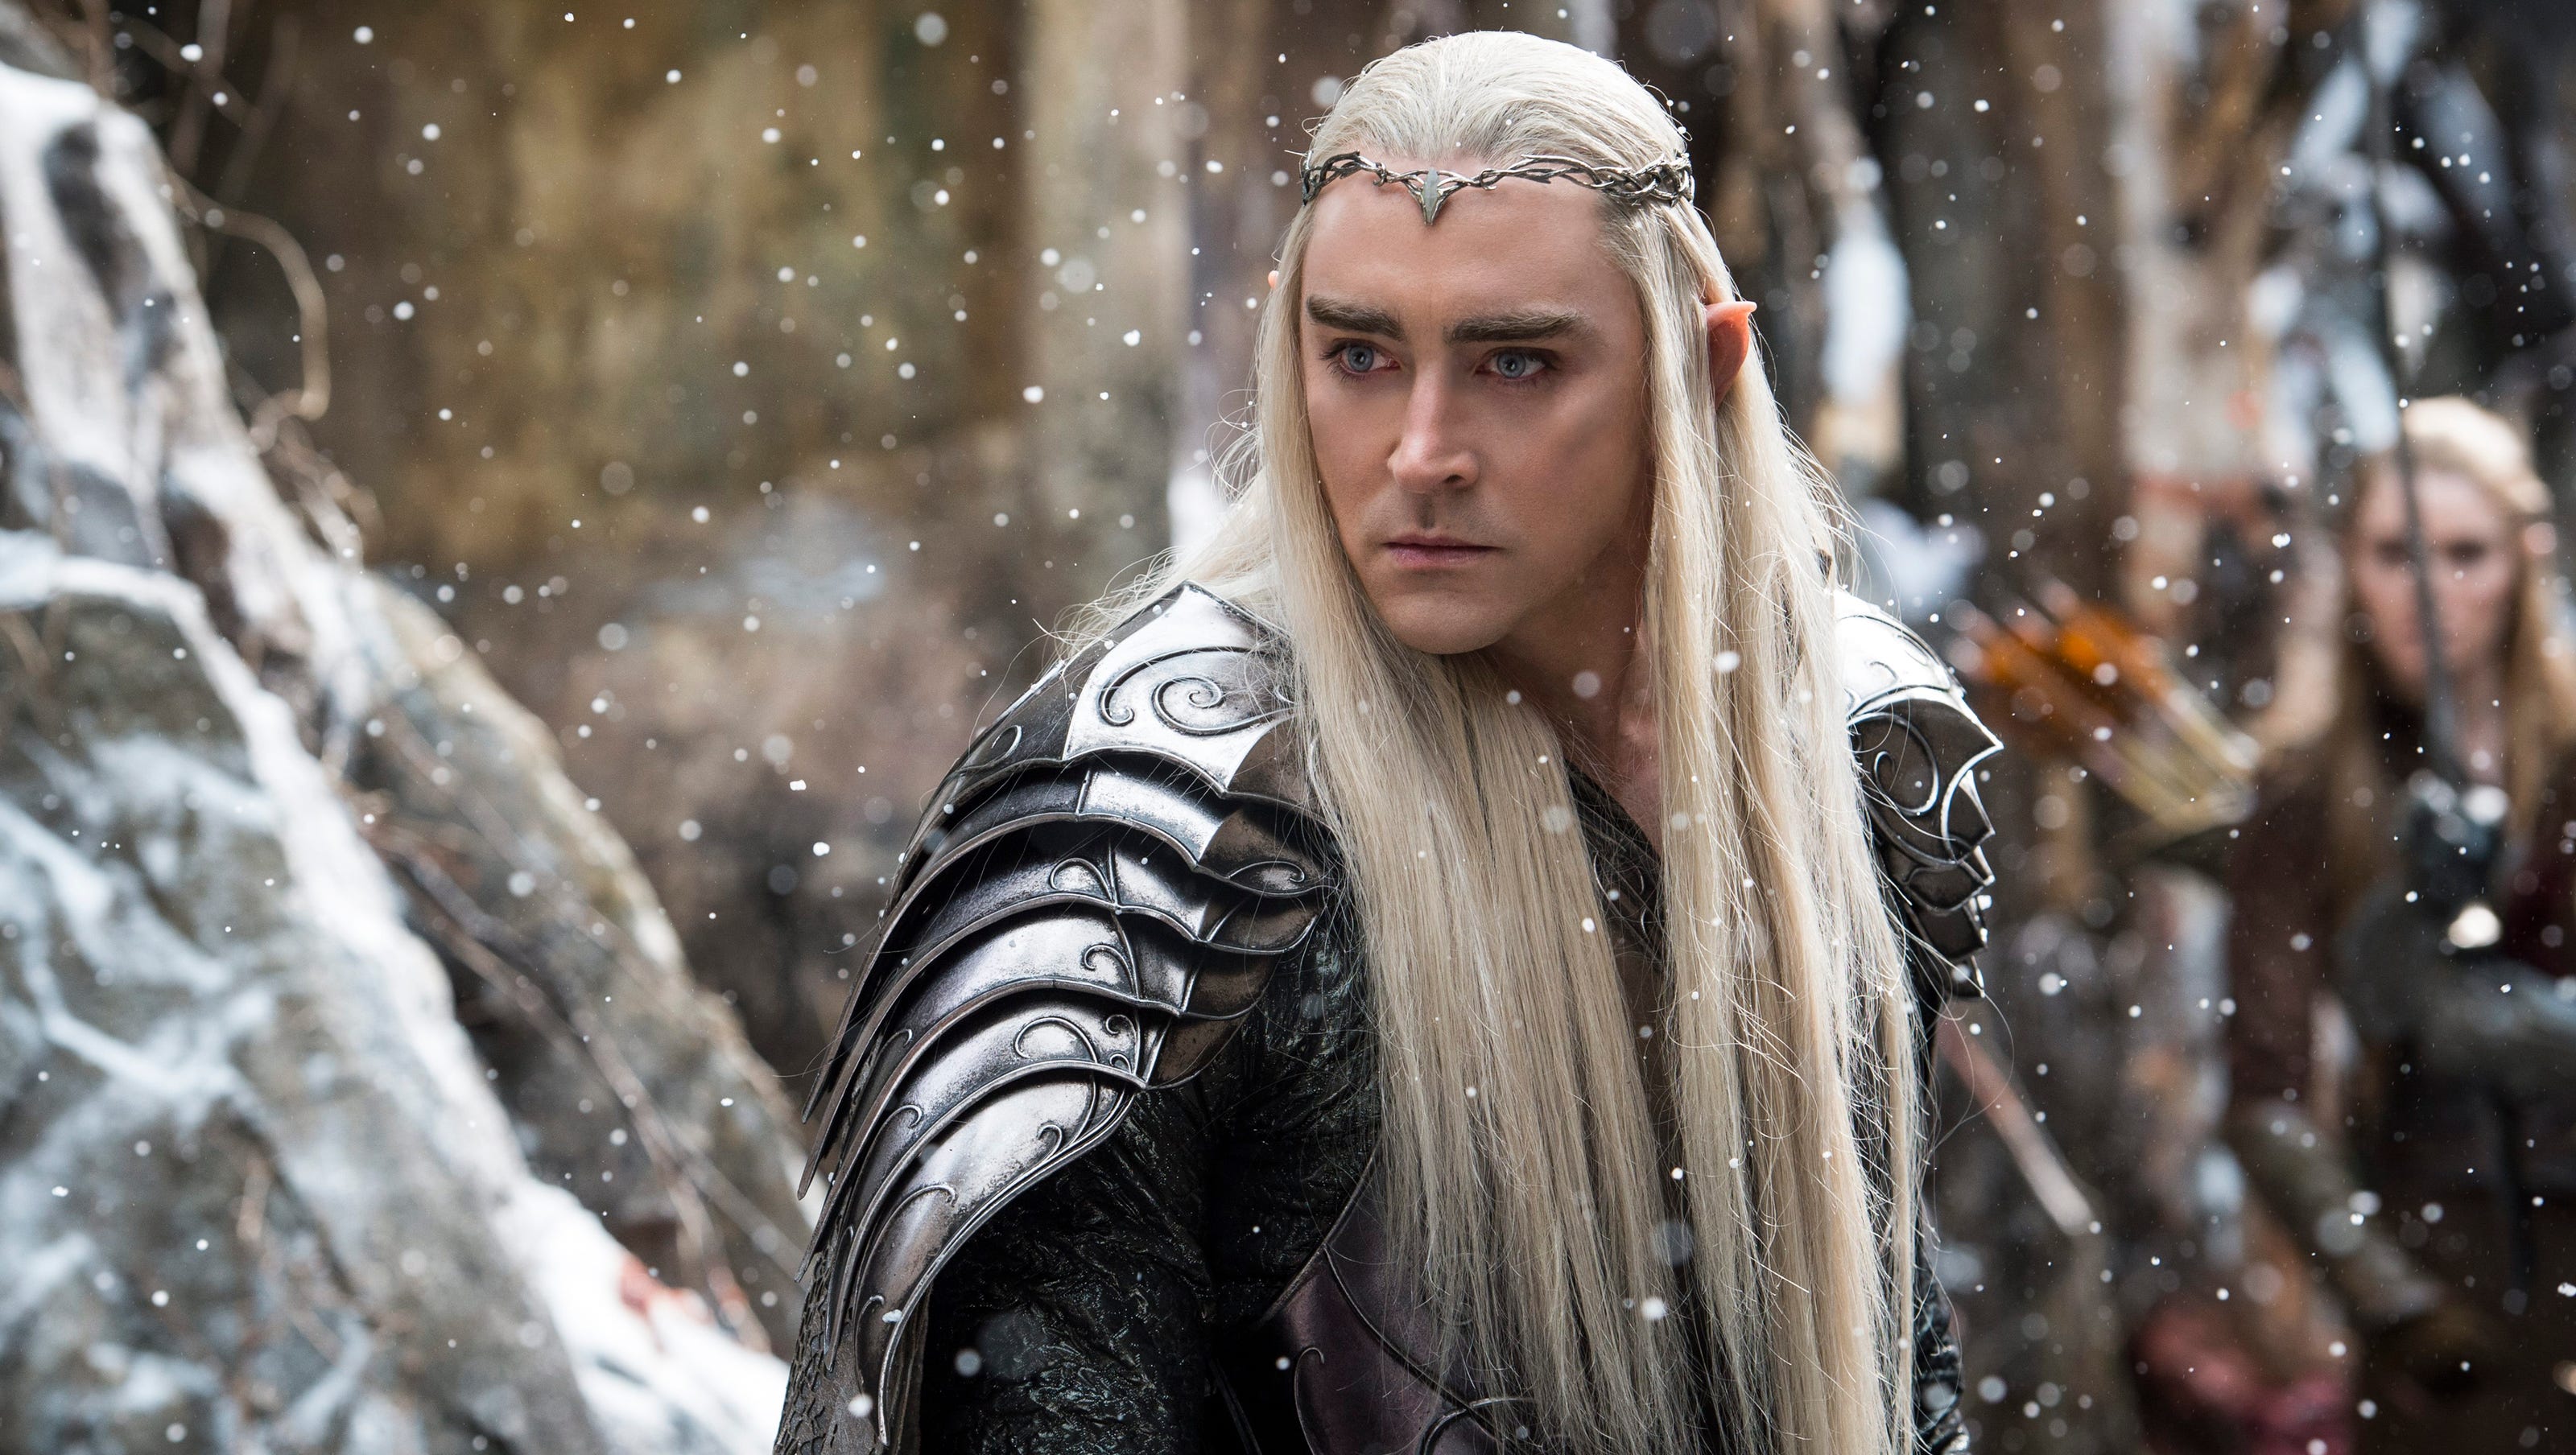 Interview: Going behind the mask with Lee Pace